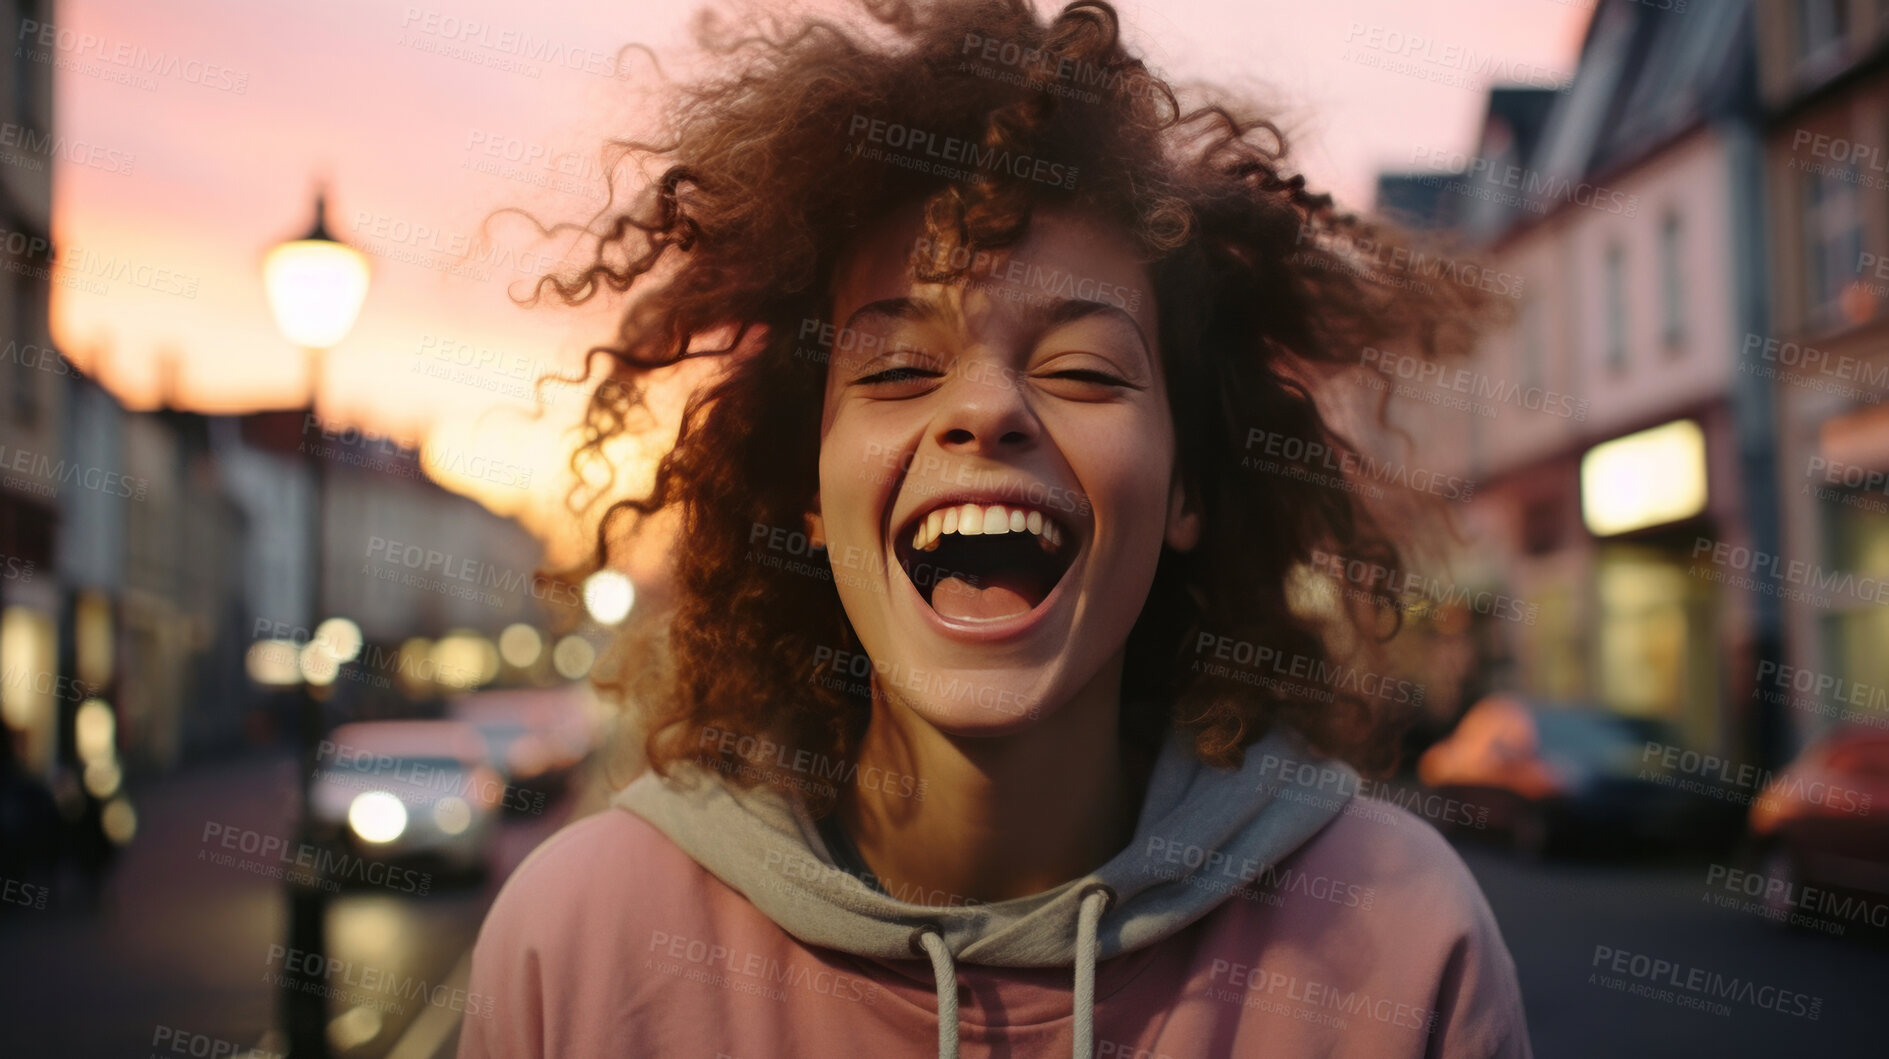 Buy stock photo Happy young woman in street.
Laughing or shouting eyes closed. Freedom concept.